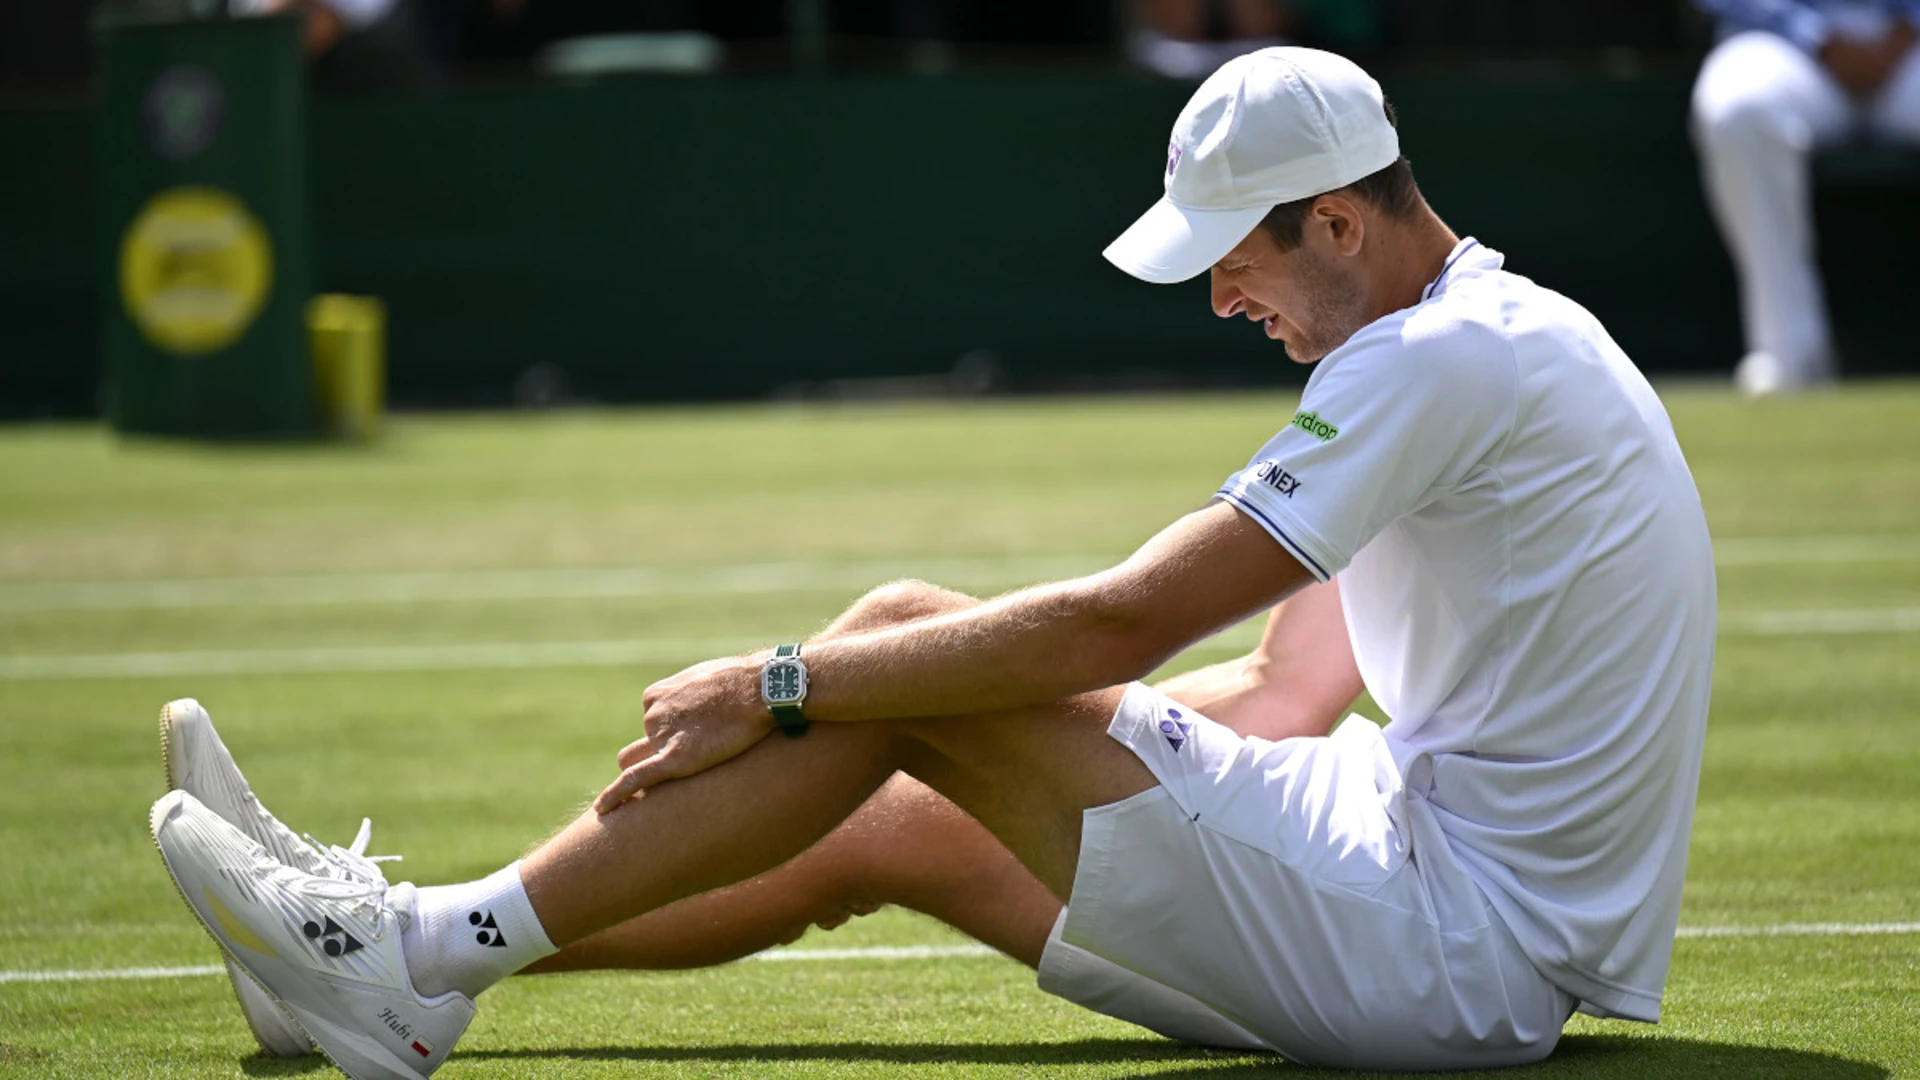 Injury forces seventh seed Hurkacz to quit Wimbledon match